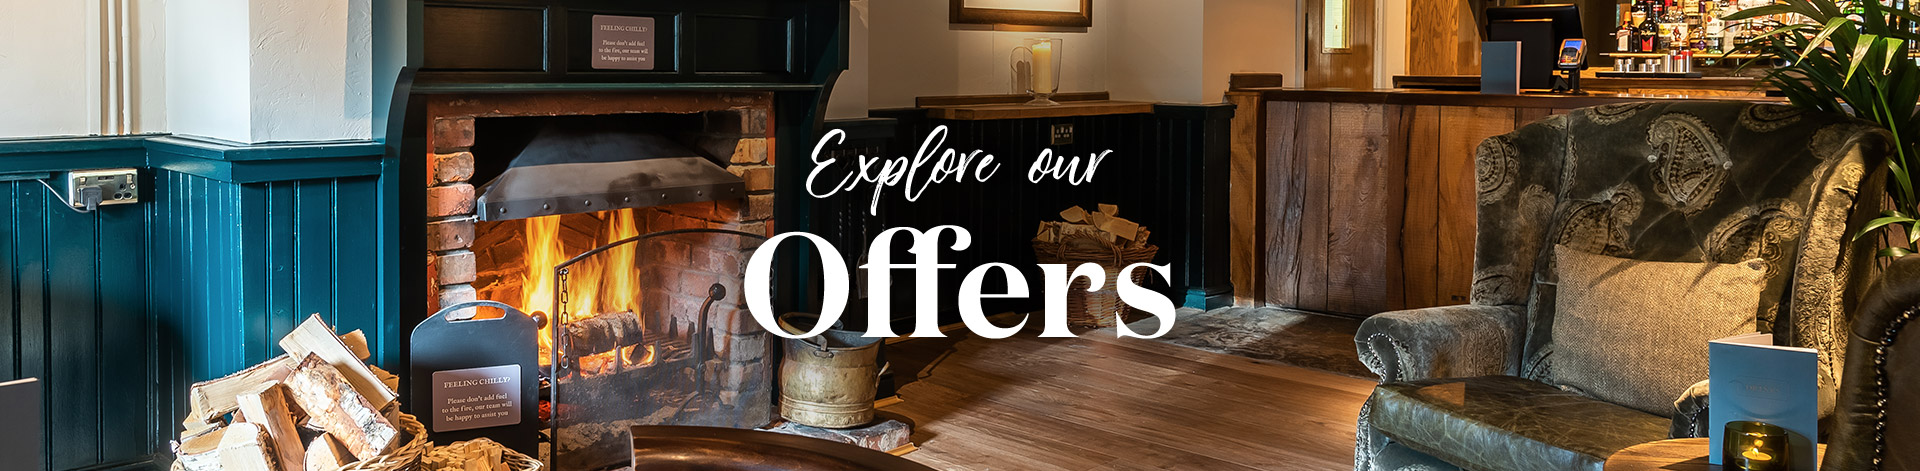 Our latest offers at The Walton Arms